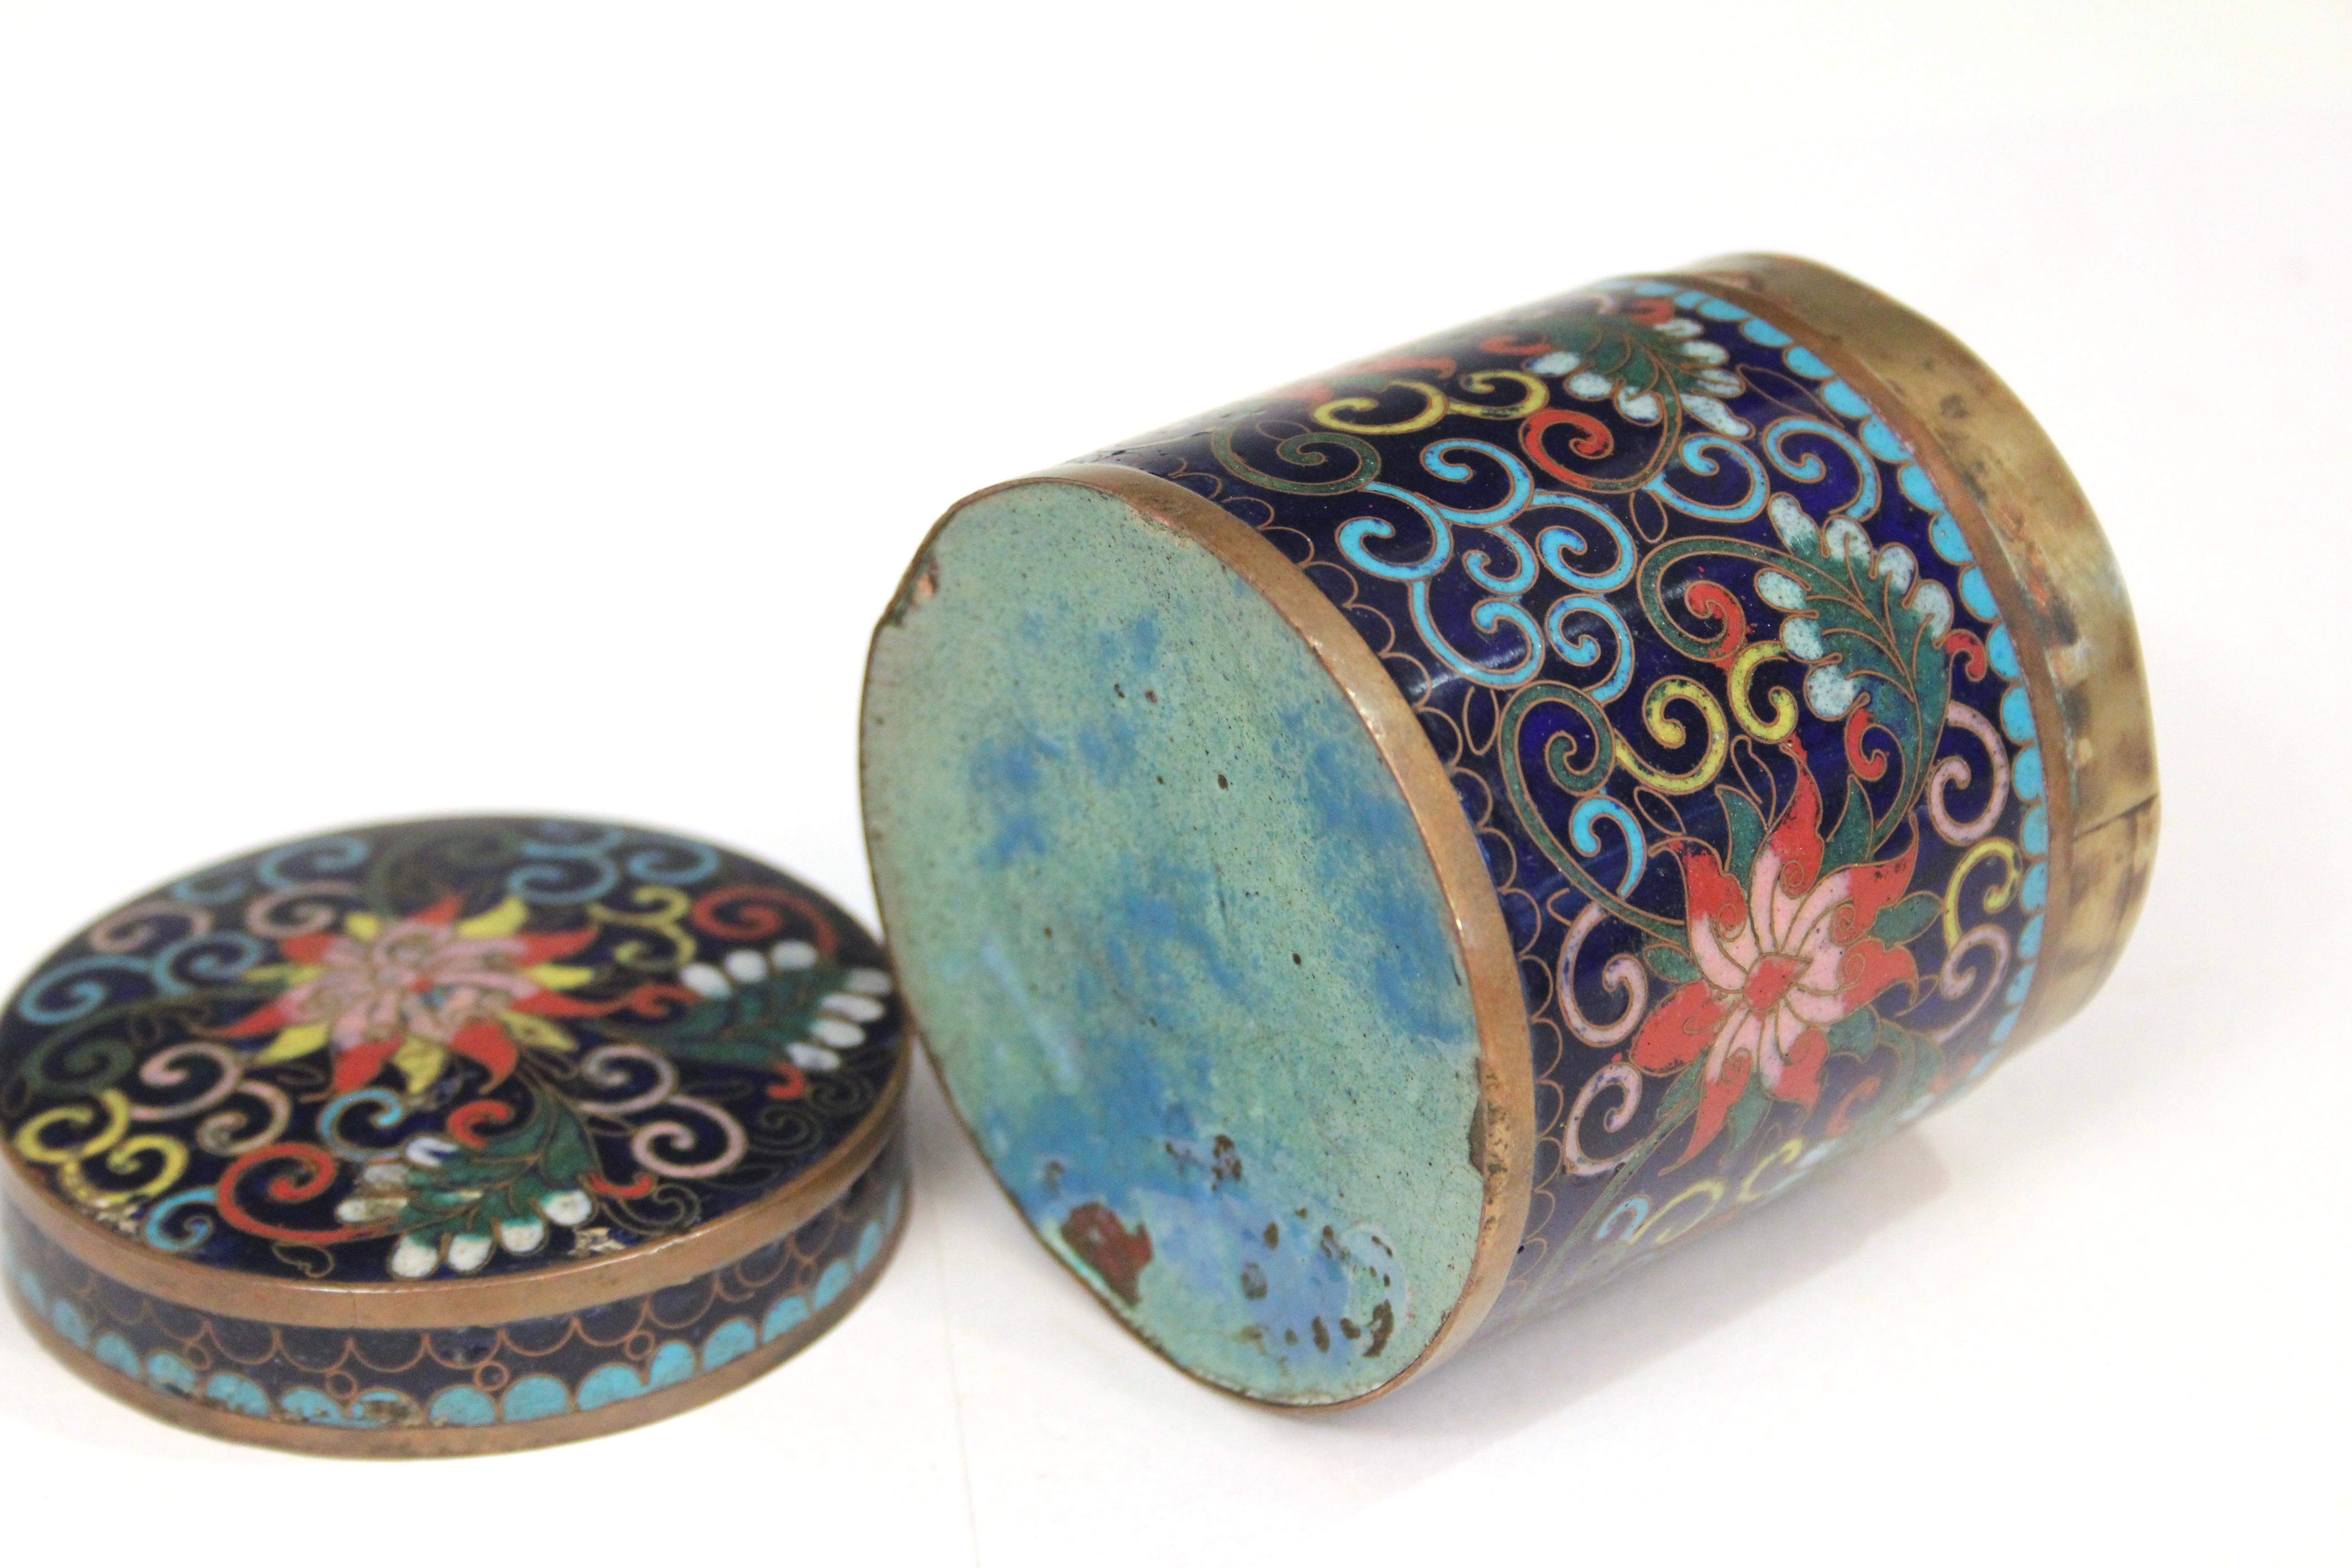 Antique Chinese Cloisonne Jar Box Cannister and Cover Copper Enamel In Fair Condition For Sale In Wilton, CT